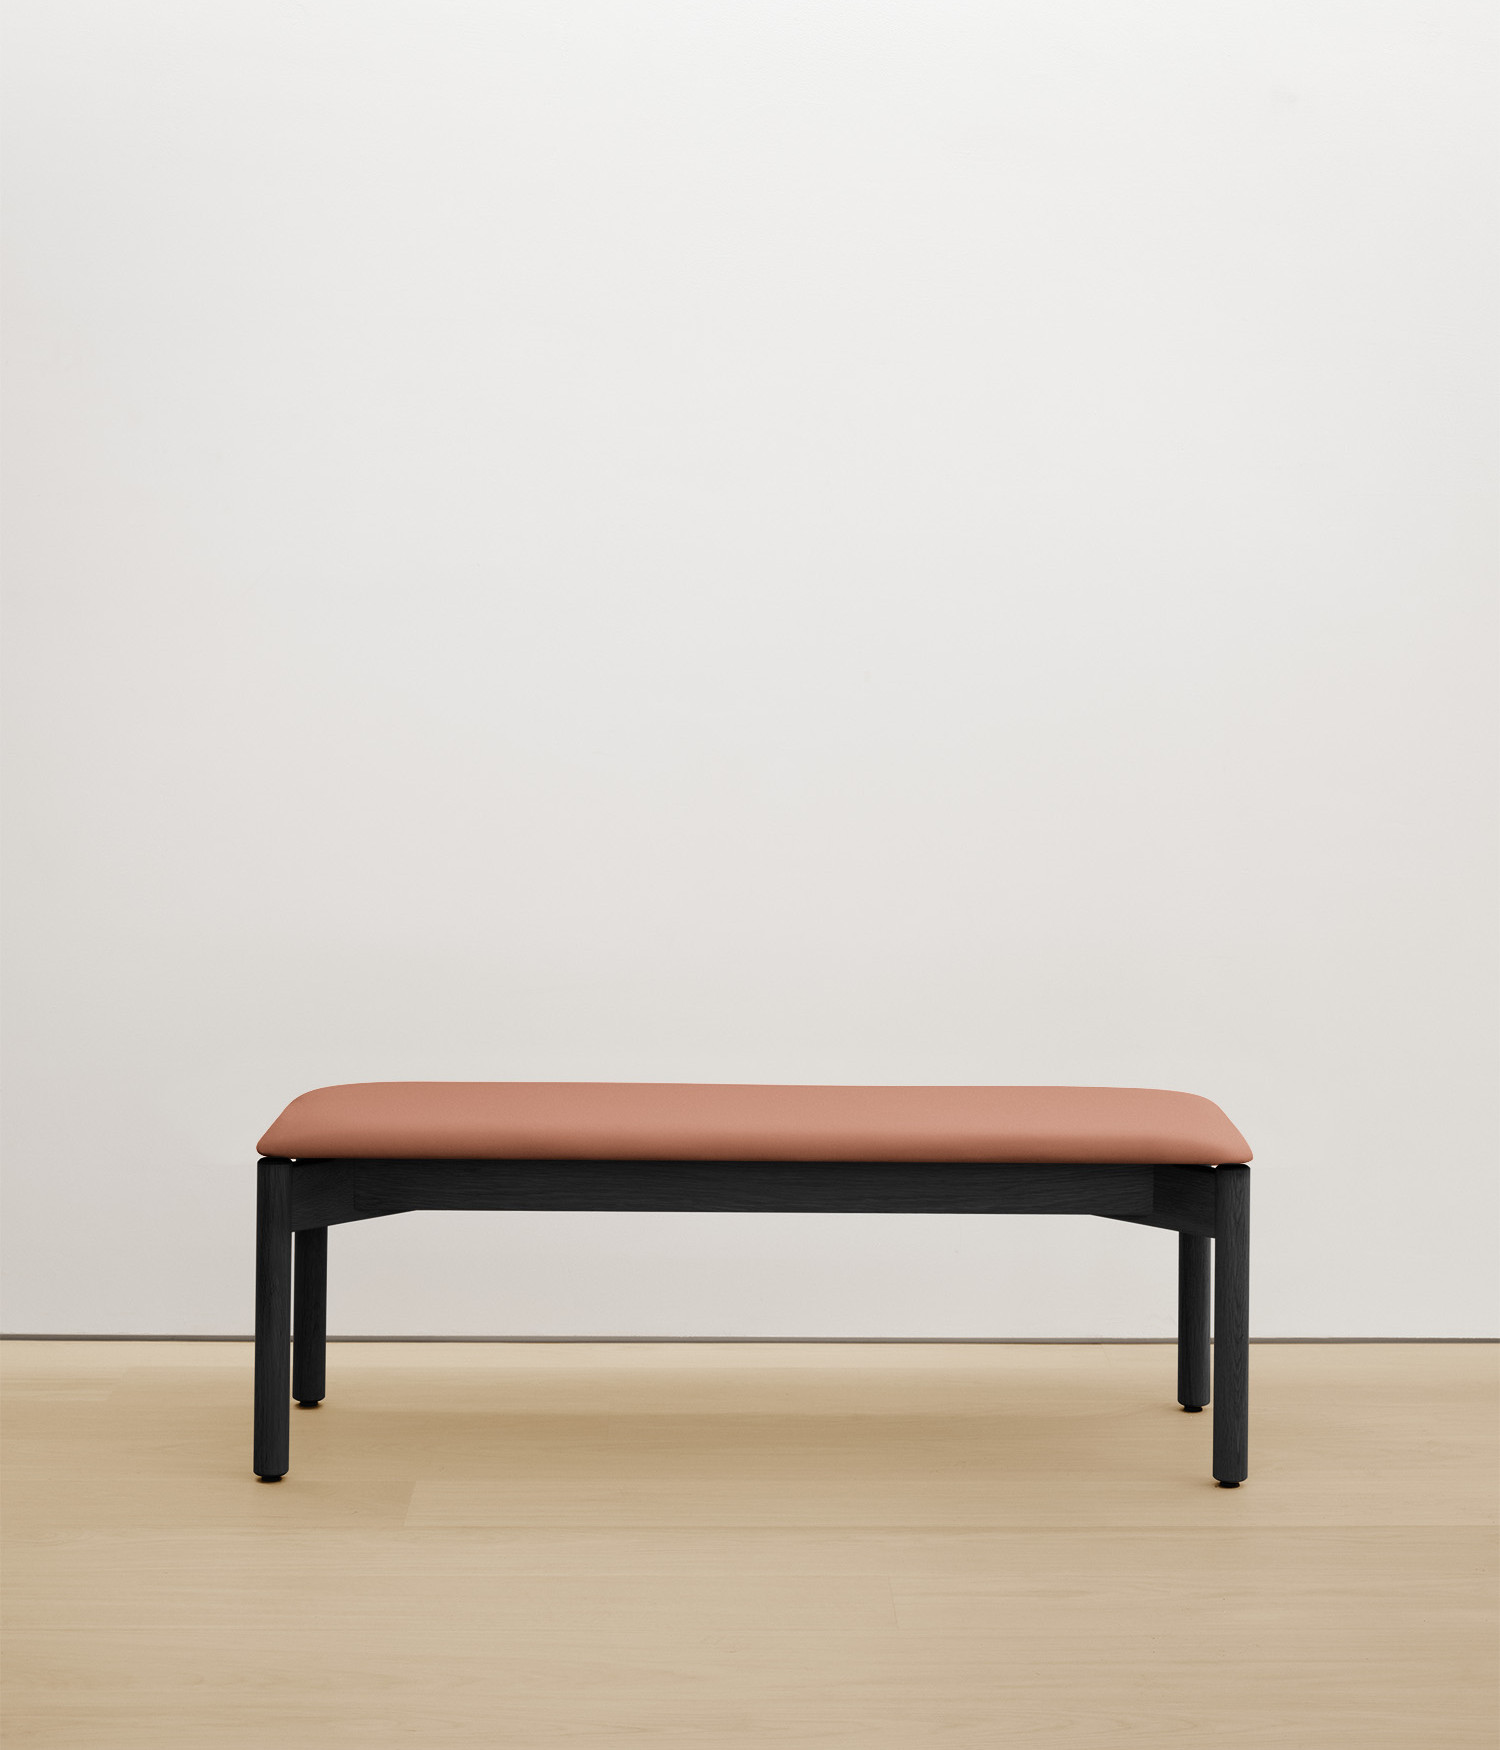 black-stained-oak bench with clay upholstered seat